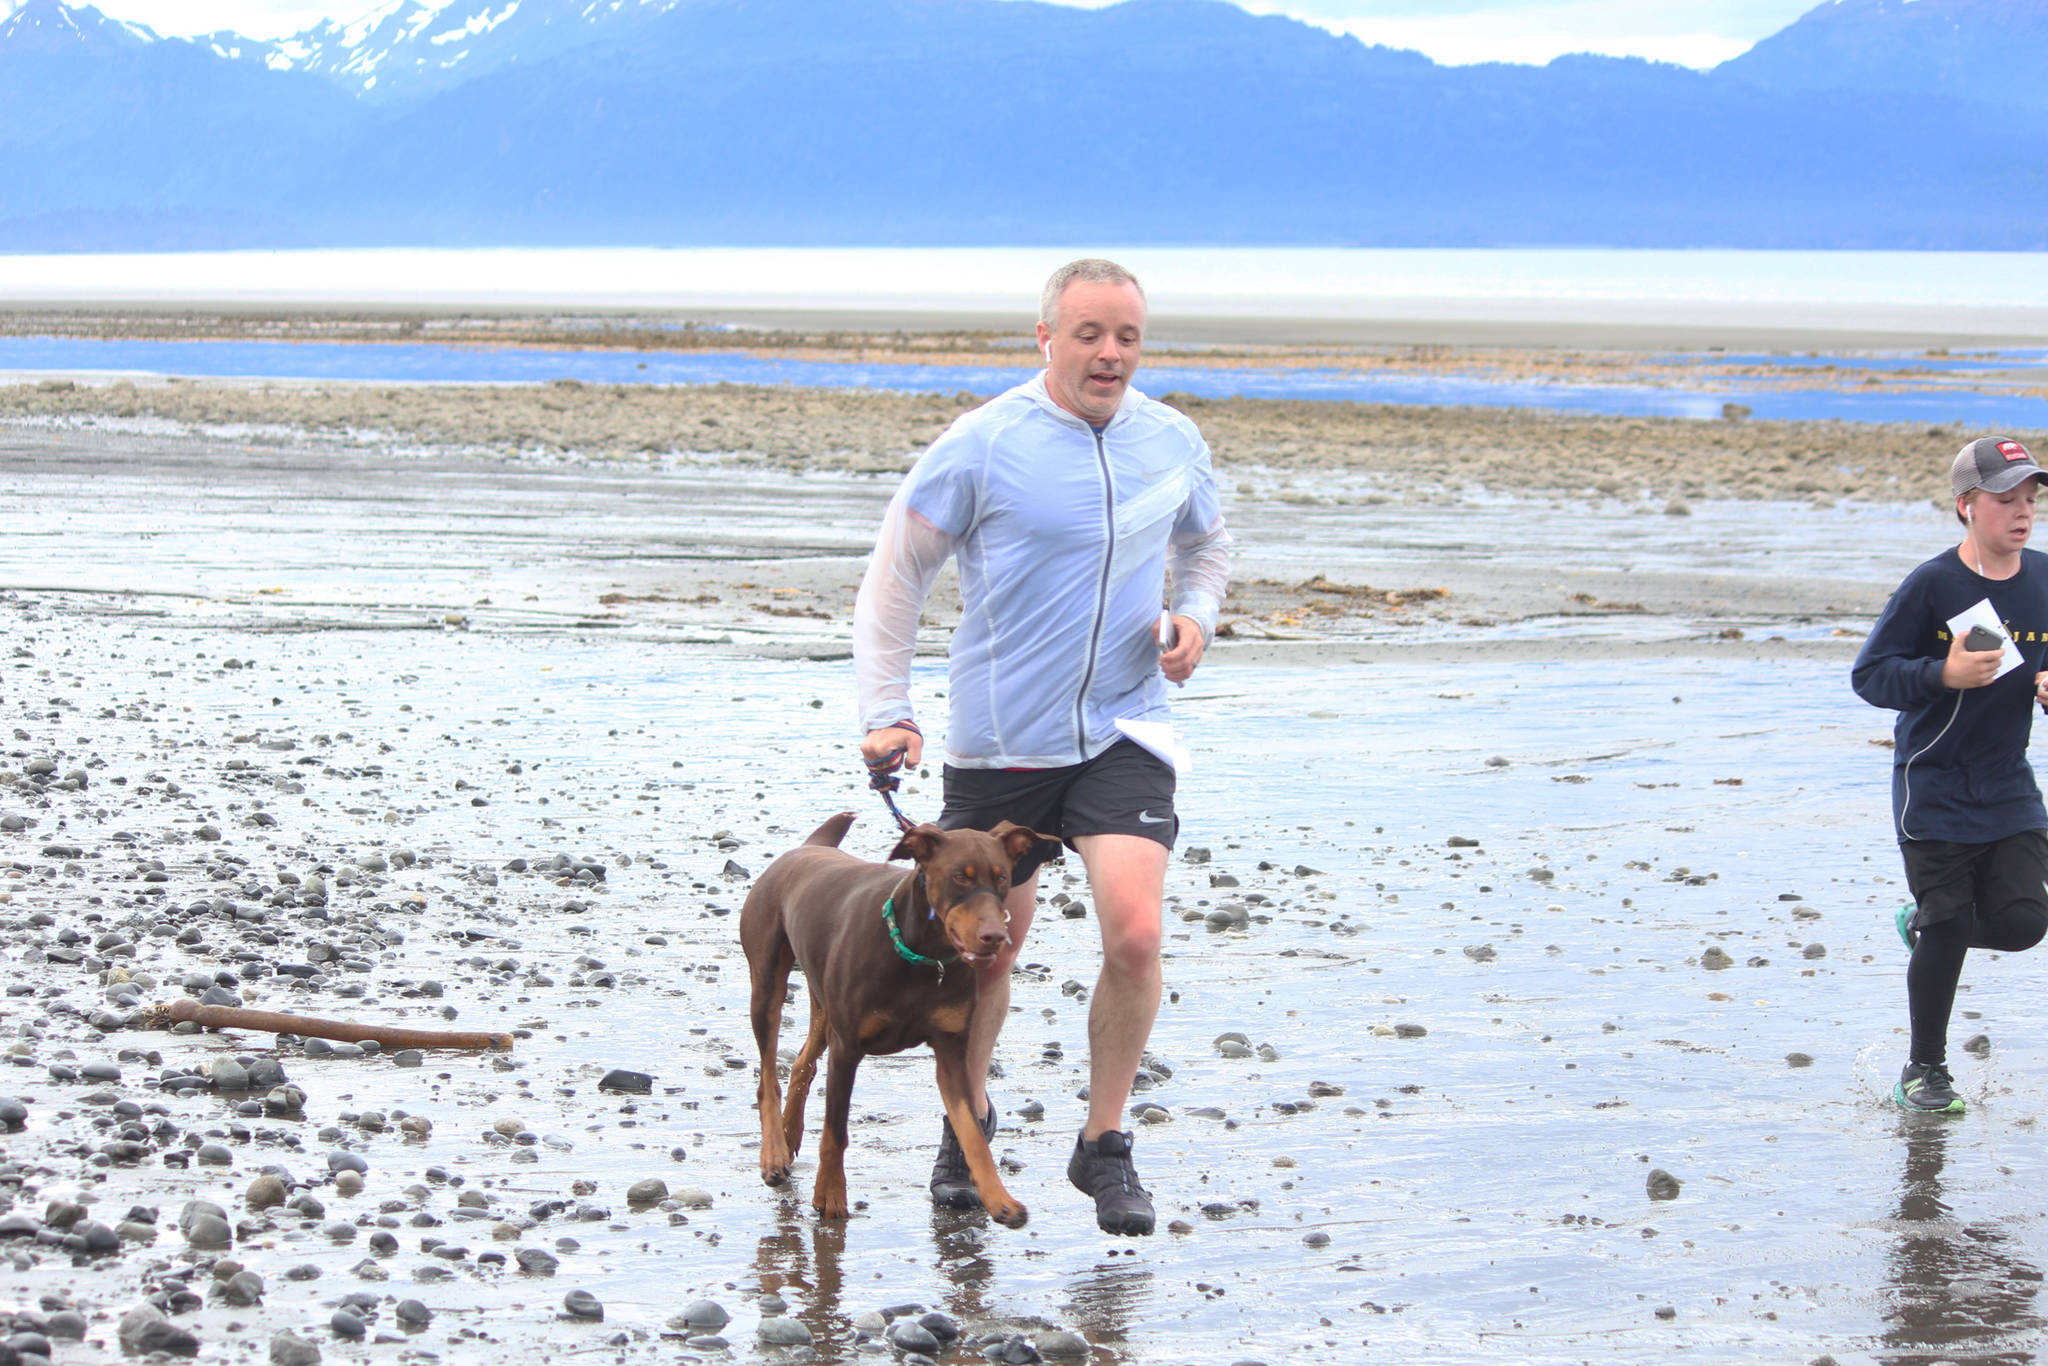 A runner approaches the finish line of the Chariots of Fur 5K with his dog on Saturday, July 14, 2018 near Mariner Park in Homer, Alaska. (Photo by Megan Pacer/Homer News)